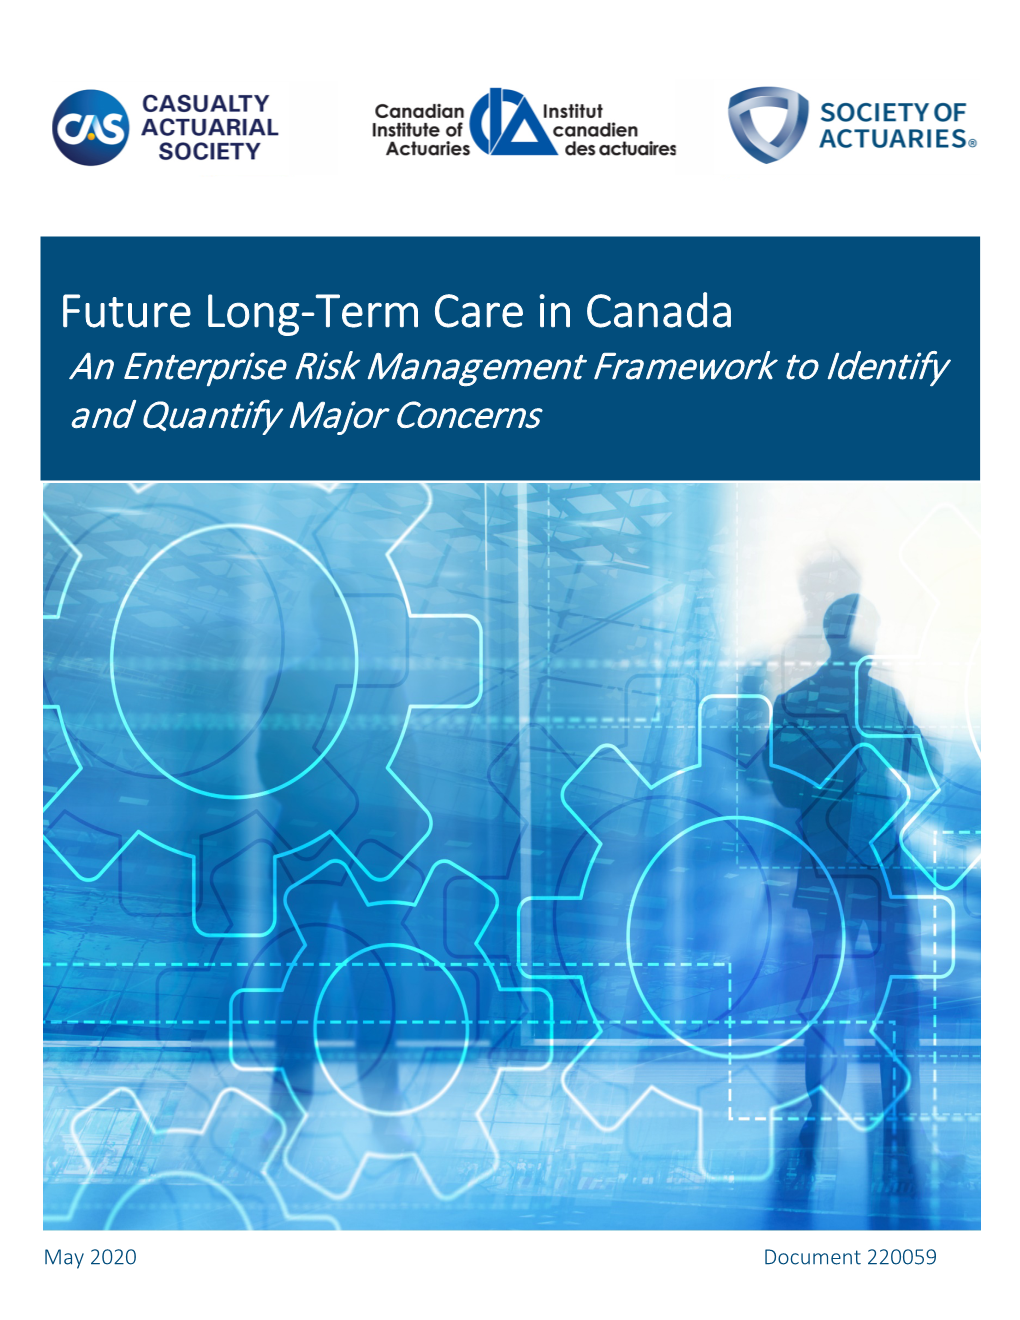 Future Long-Term Care in Canada an Enterprise Risk Management Framework to Identify and Quantify Major Concerns